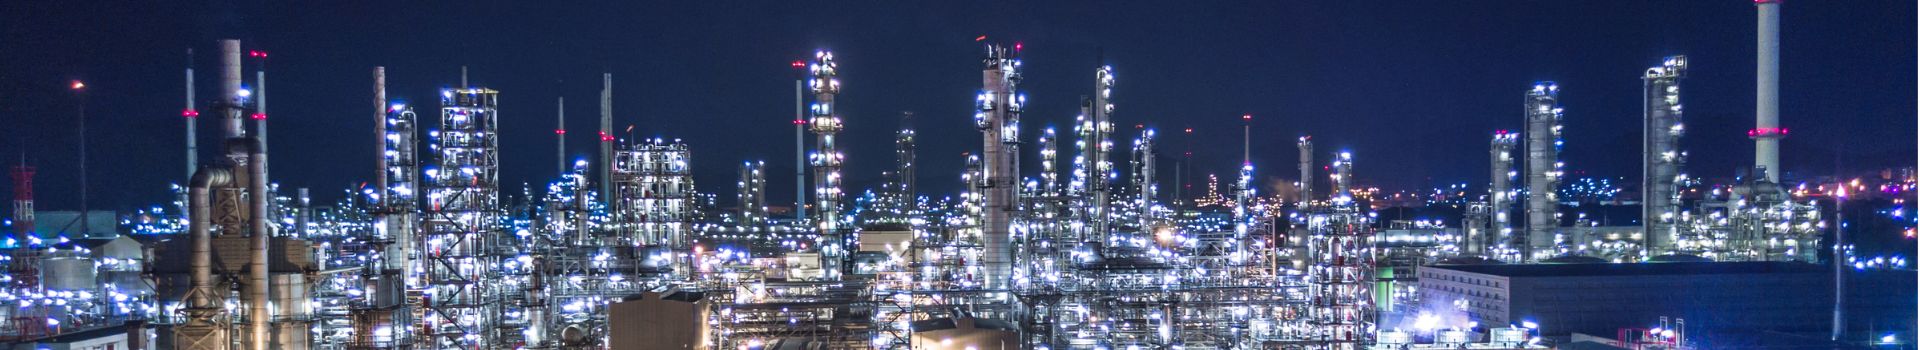 a highly lit up oil refinery at nighttime